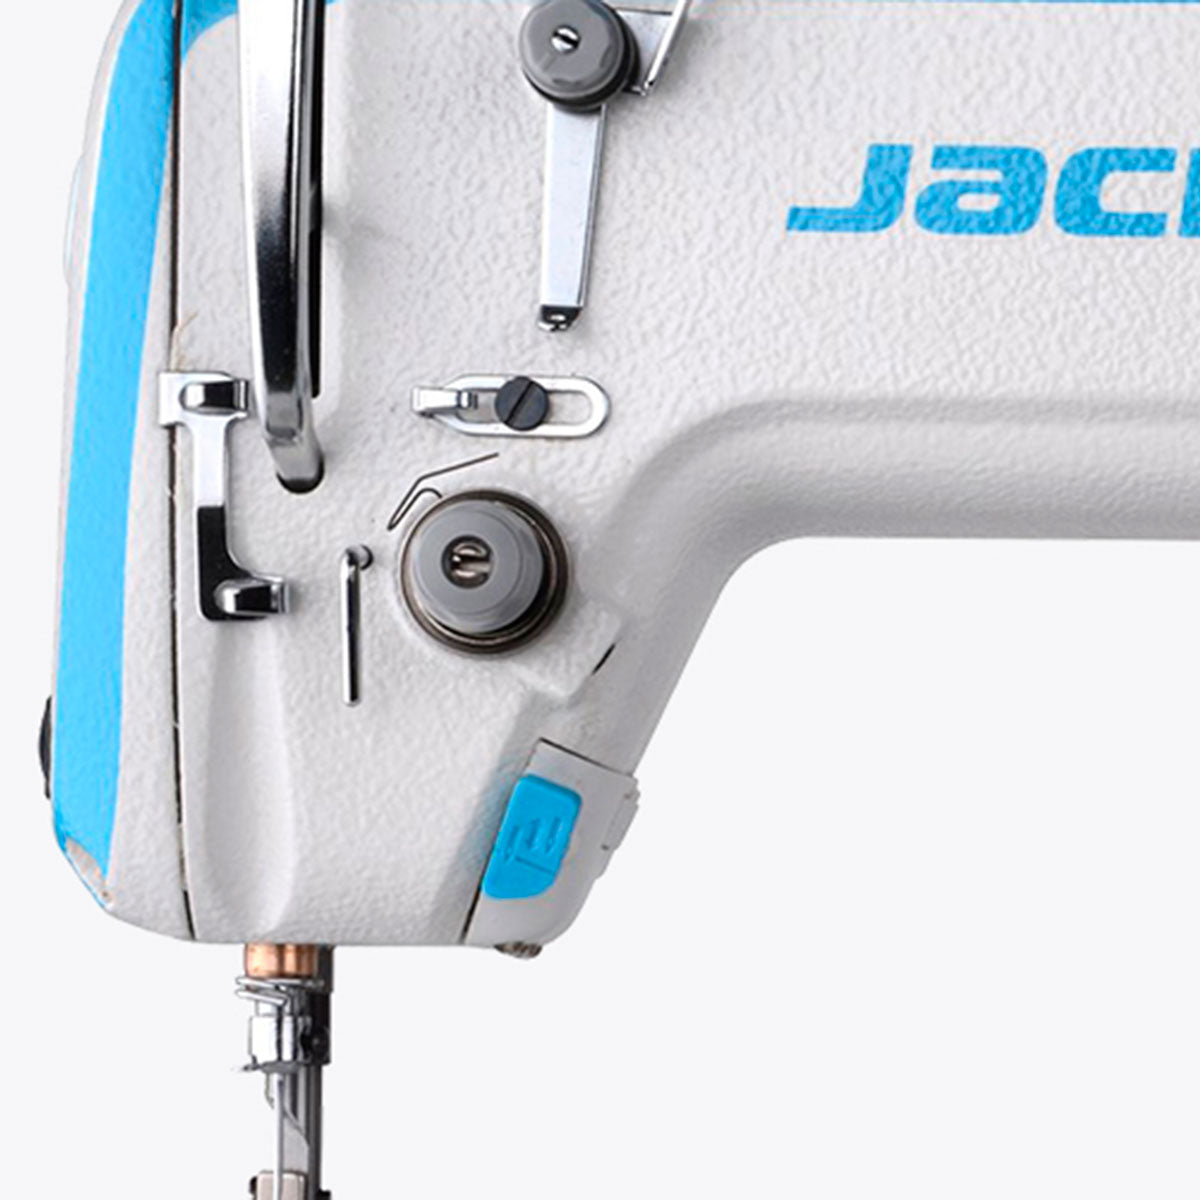 JACK A2BC High-Speed Single Needle Lockstitch Machine with Automatic Thread Trimmer Assembled with Table and Stand Included